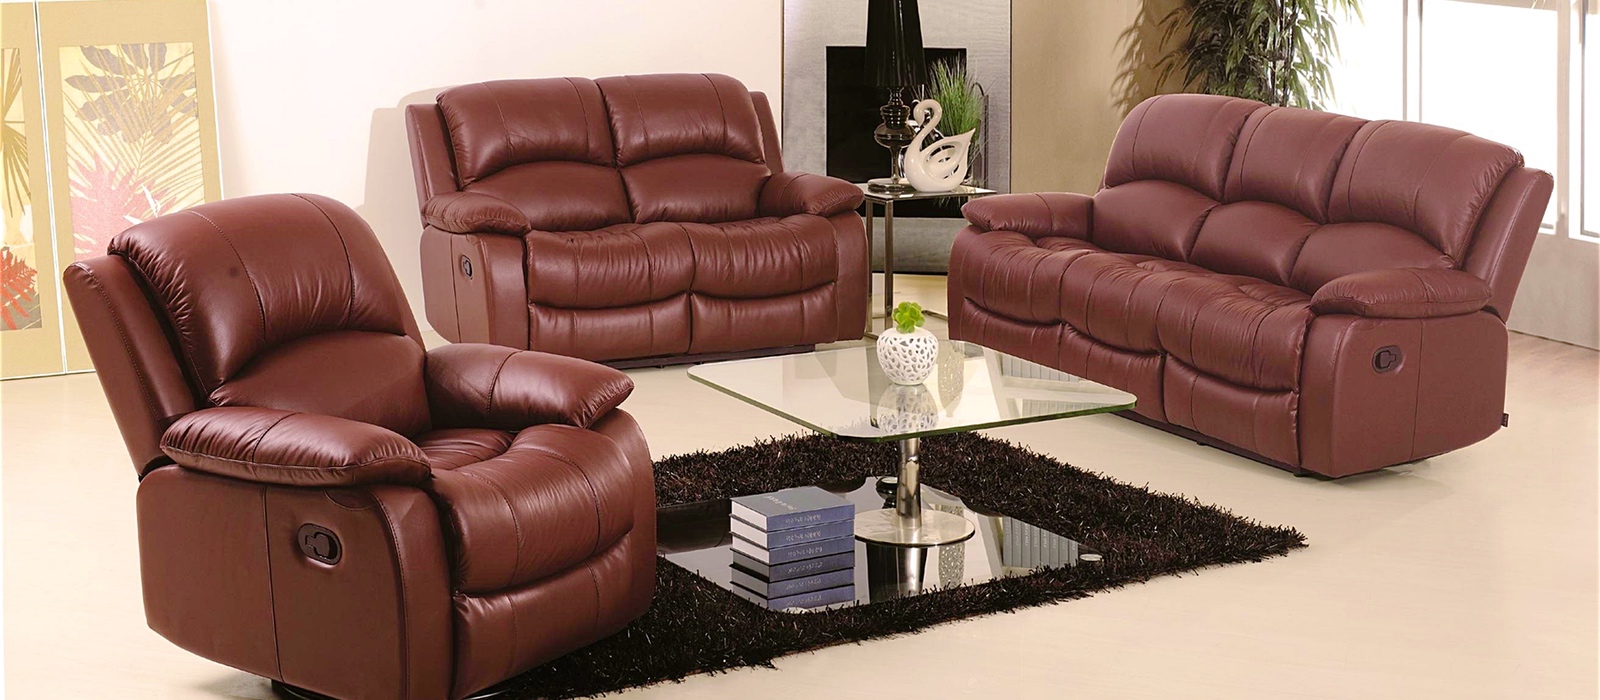 Brown colored leather sofa in luxurious interior room